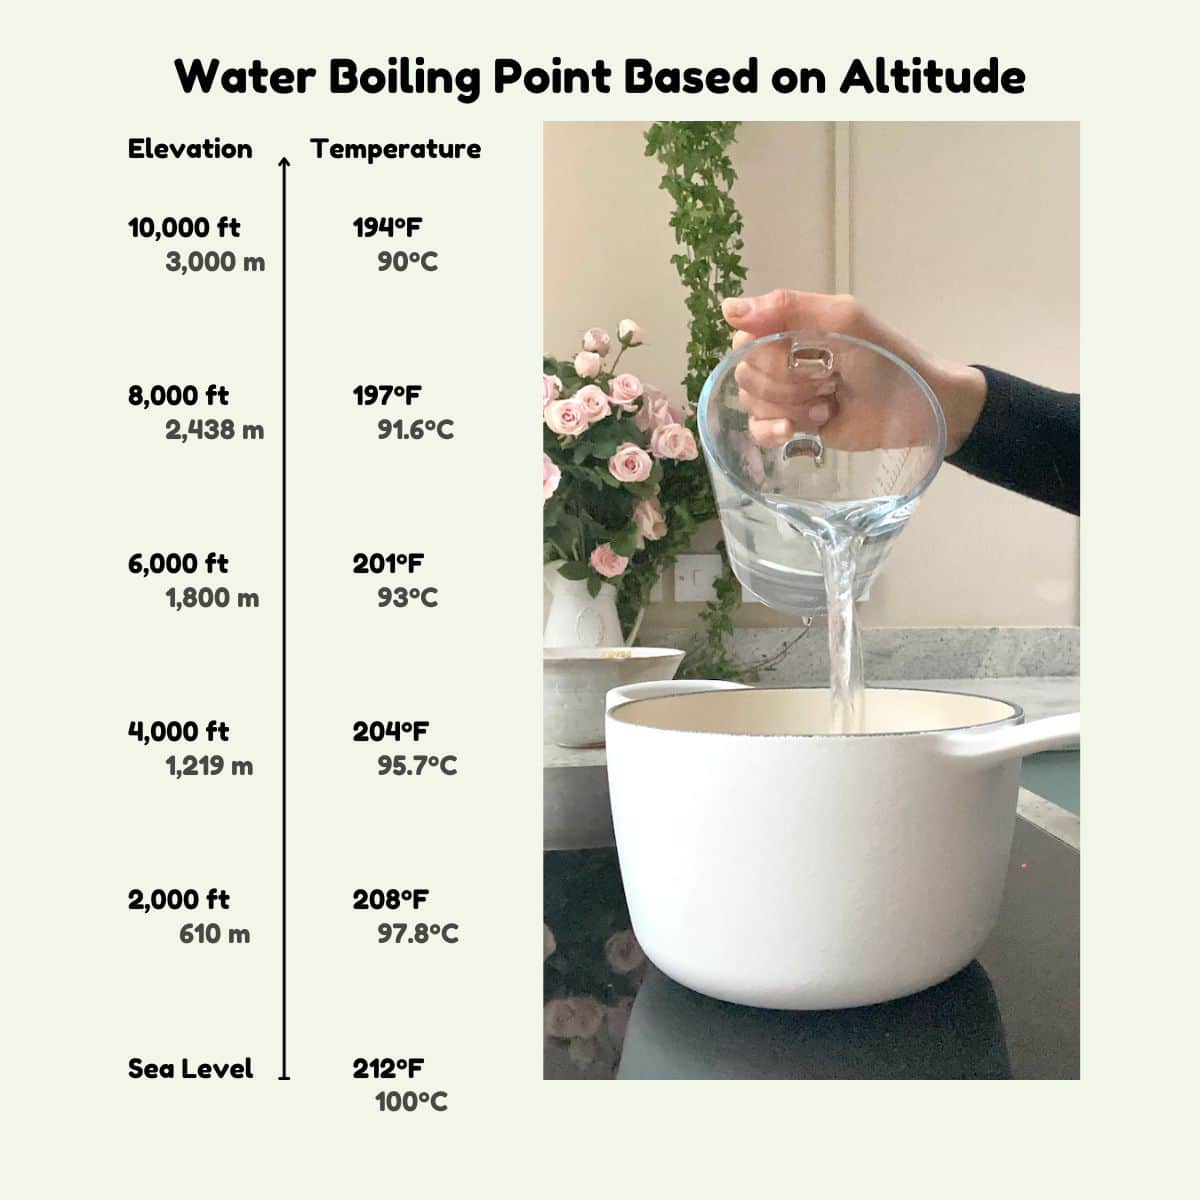 A chart of water boiling points based on altitude